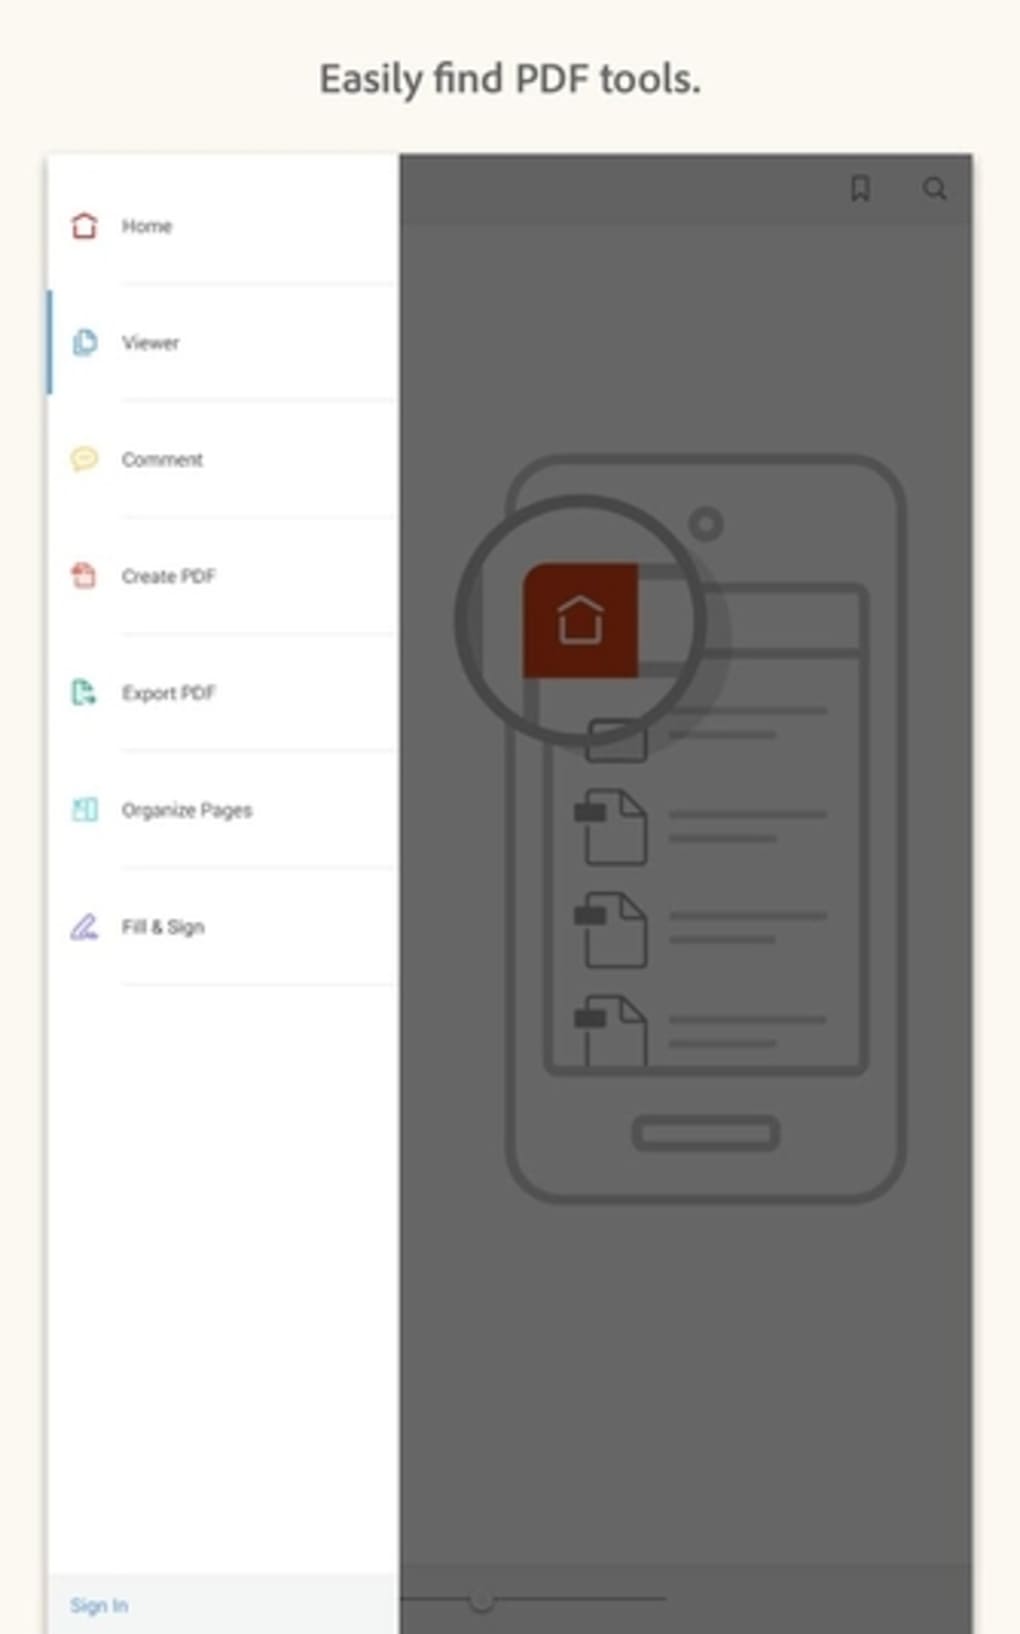 Download Adobe Flashdrive For Android